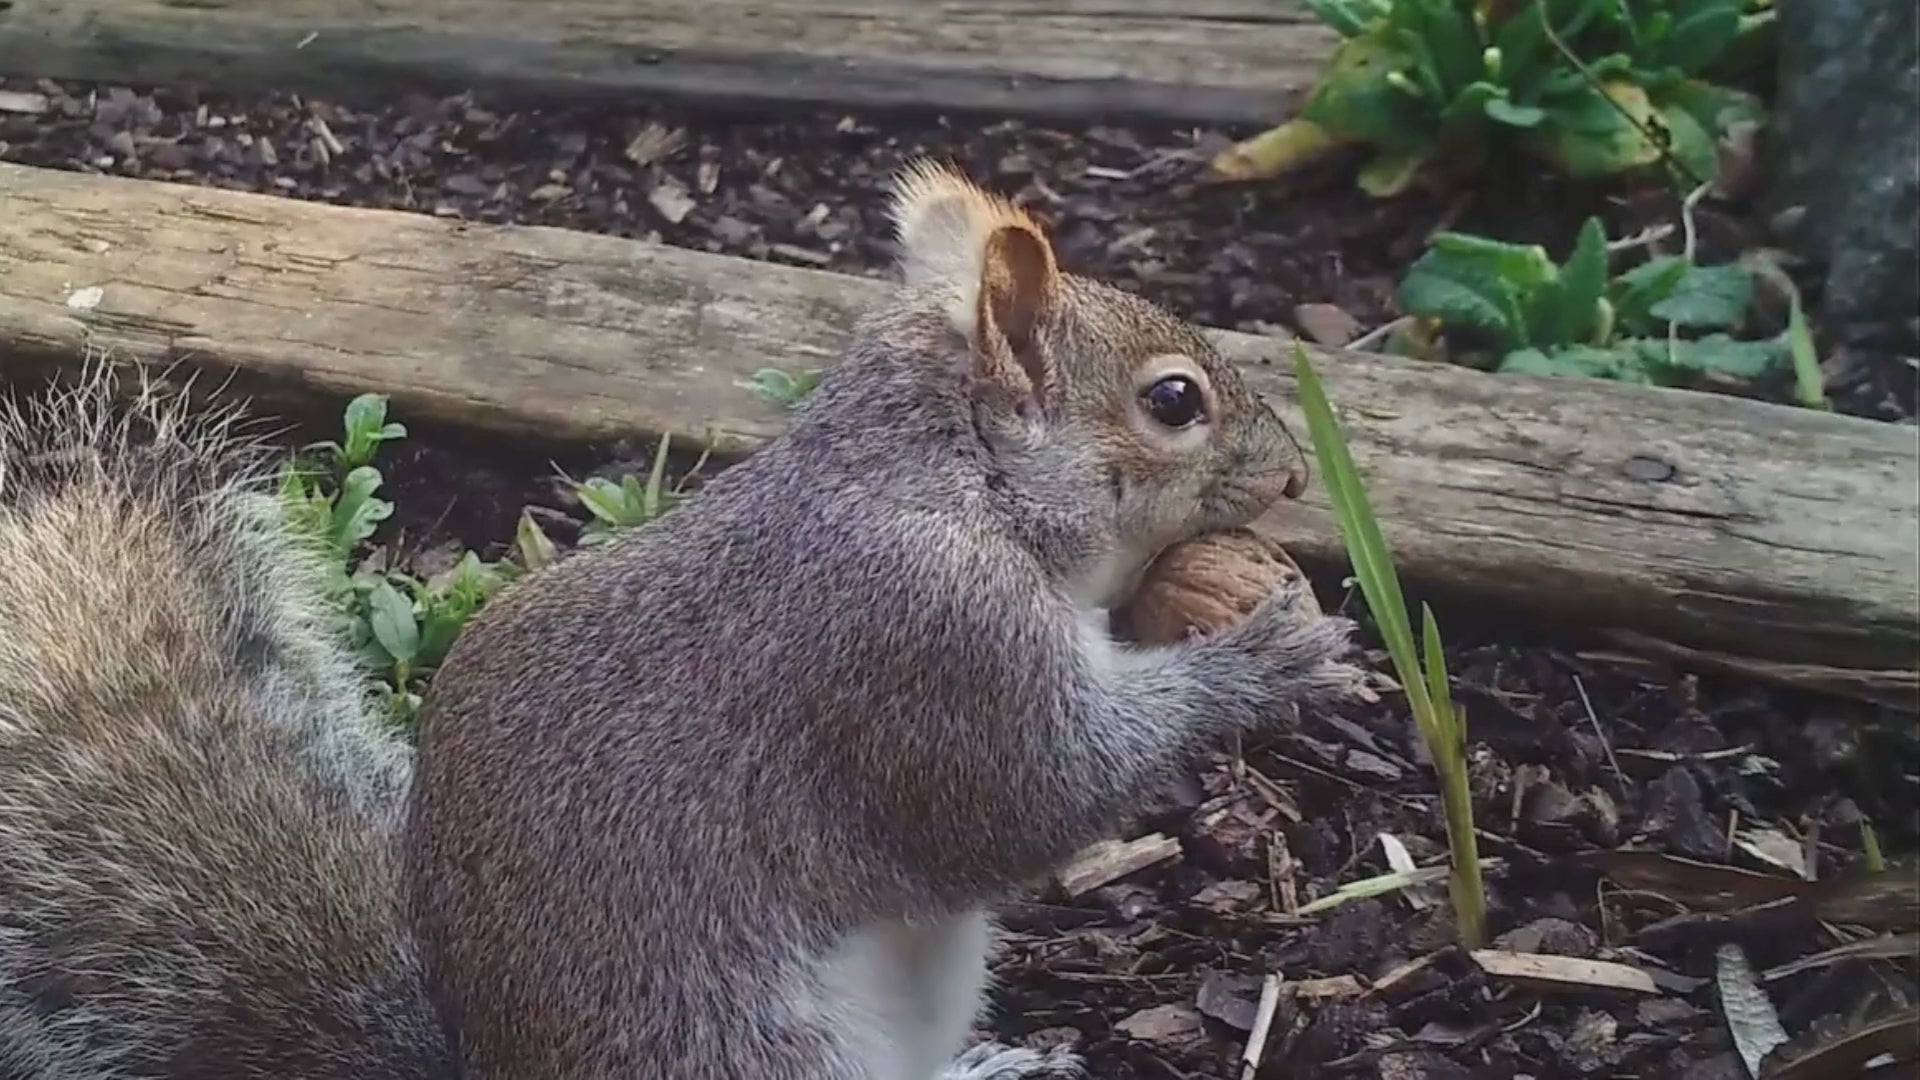 Video of a squirrel breaking in to a walnut to feed